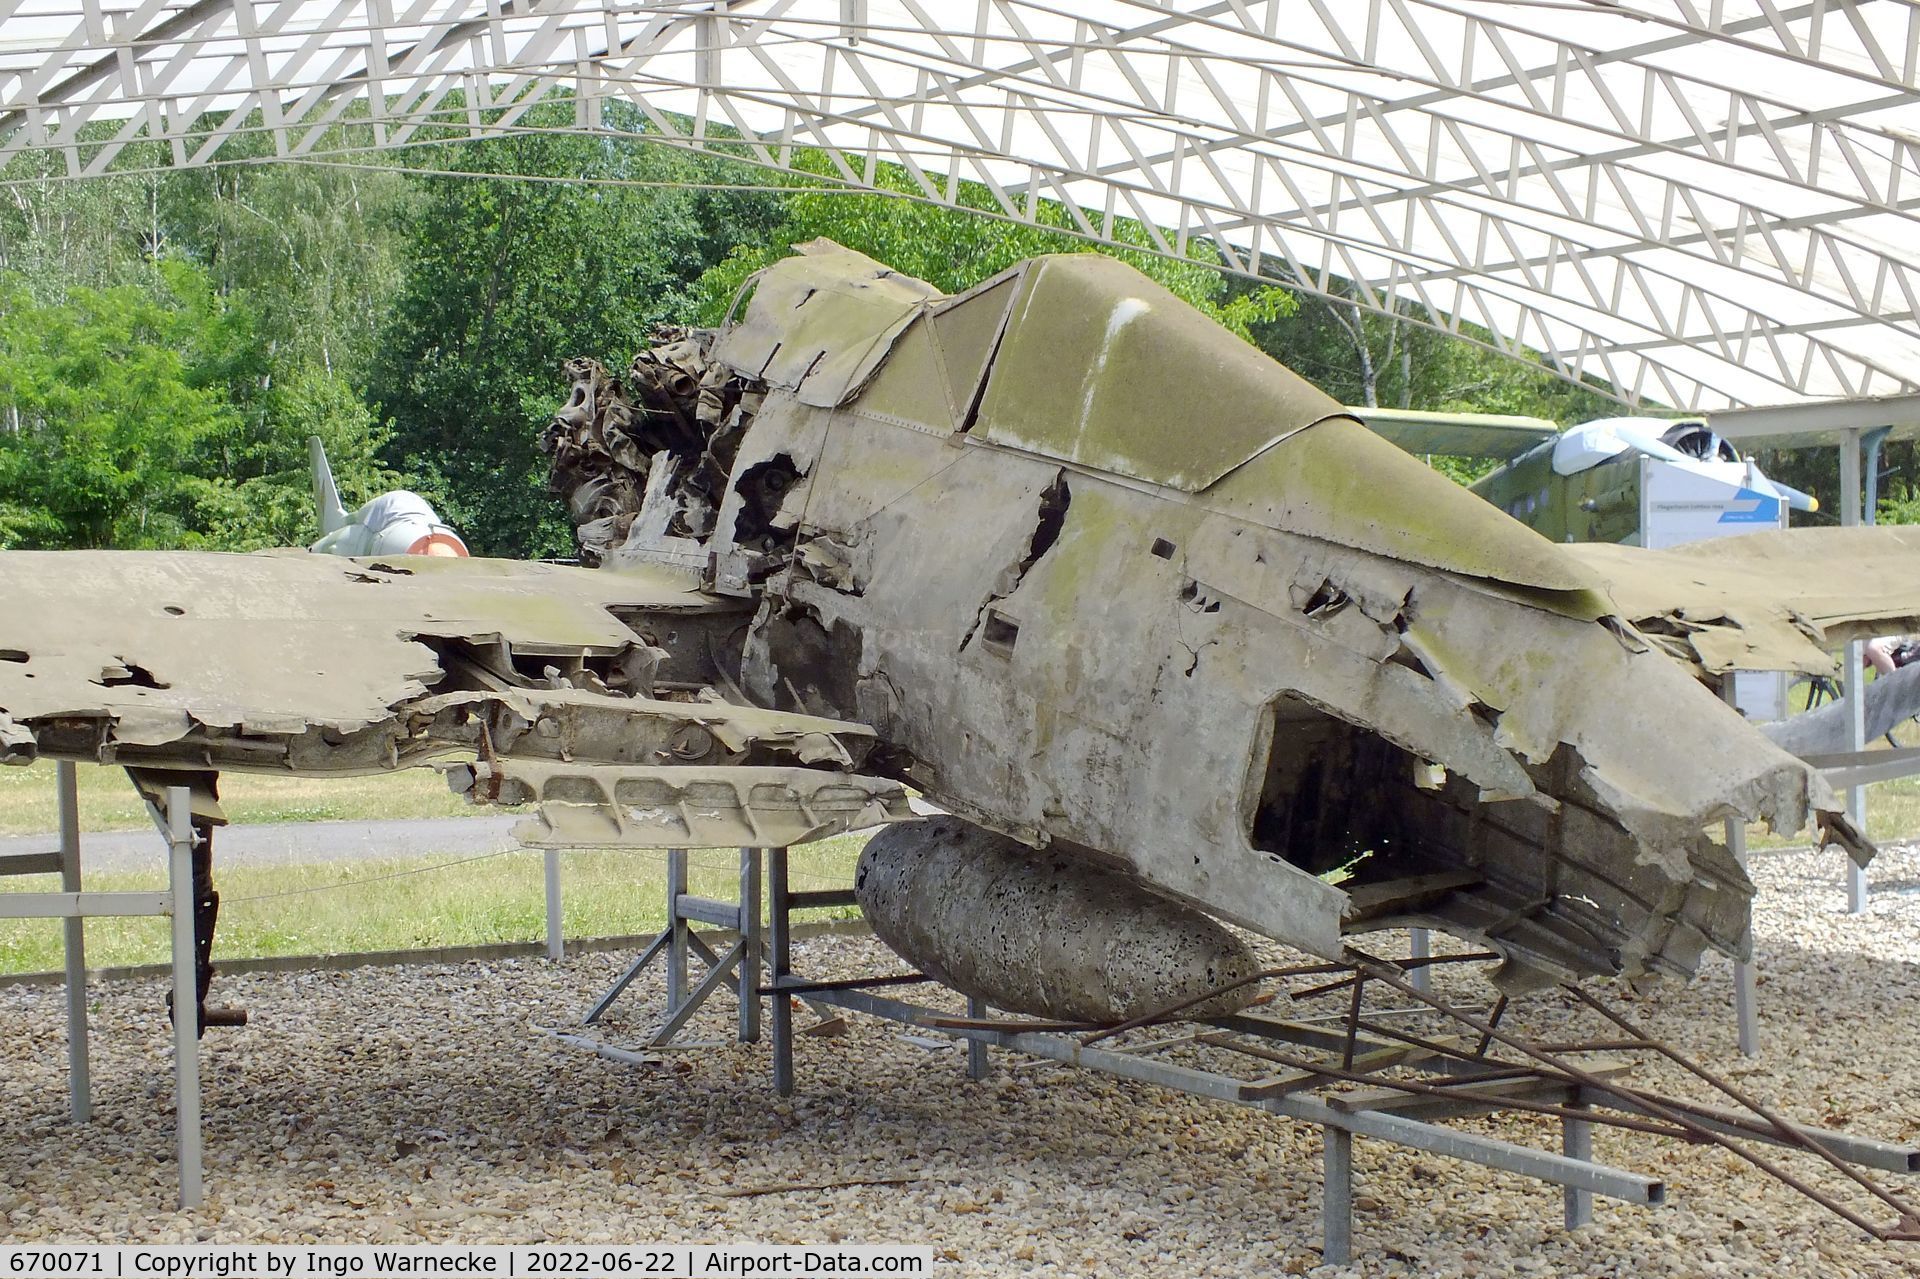 670071, Focke-Wulf Fw-190F-3 C/N Not found 670071, unrestored remains of a Focke-Wulf Fw 190F-3 wreck (forward fuselage and wings) at the Flugplatzmuseum Cottbus (Cottbus airfield museum)